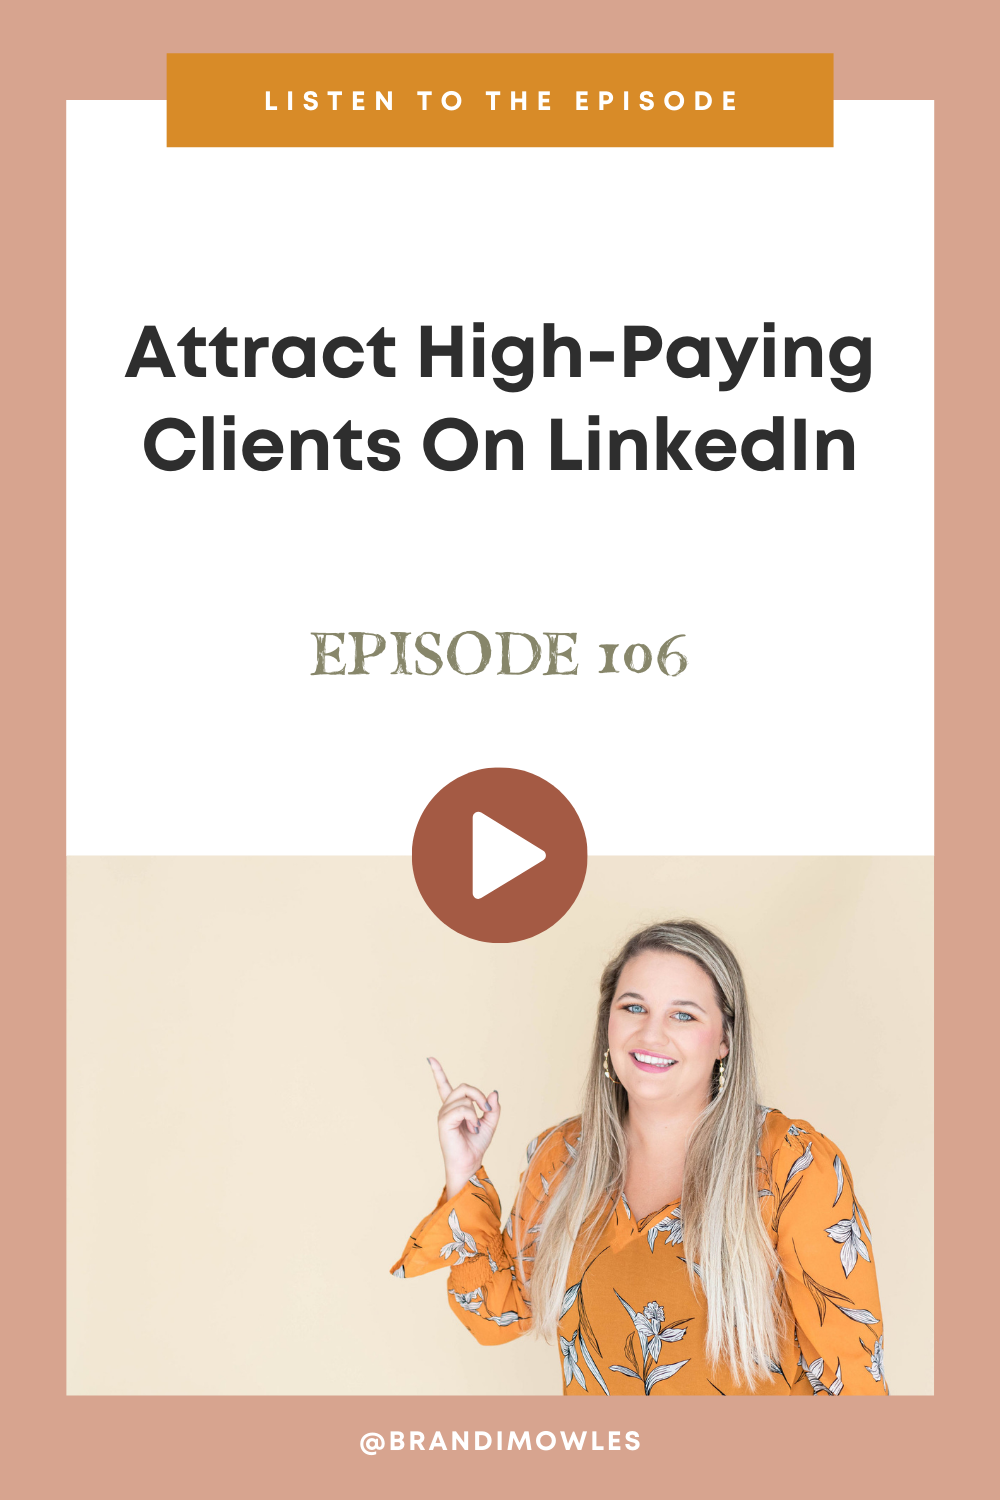 Attract High-Paying Clients On LinkedIn